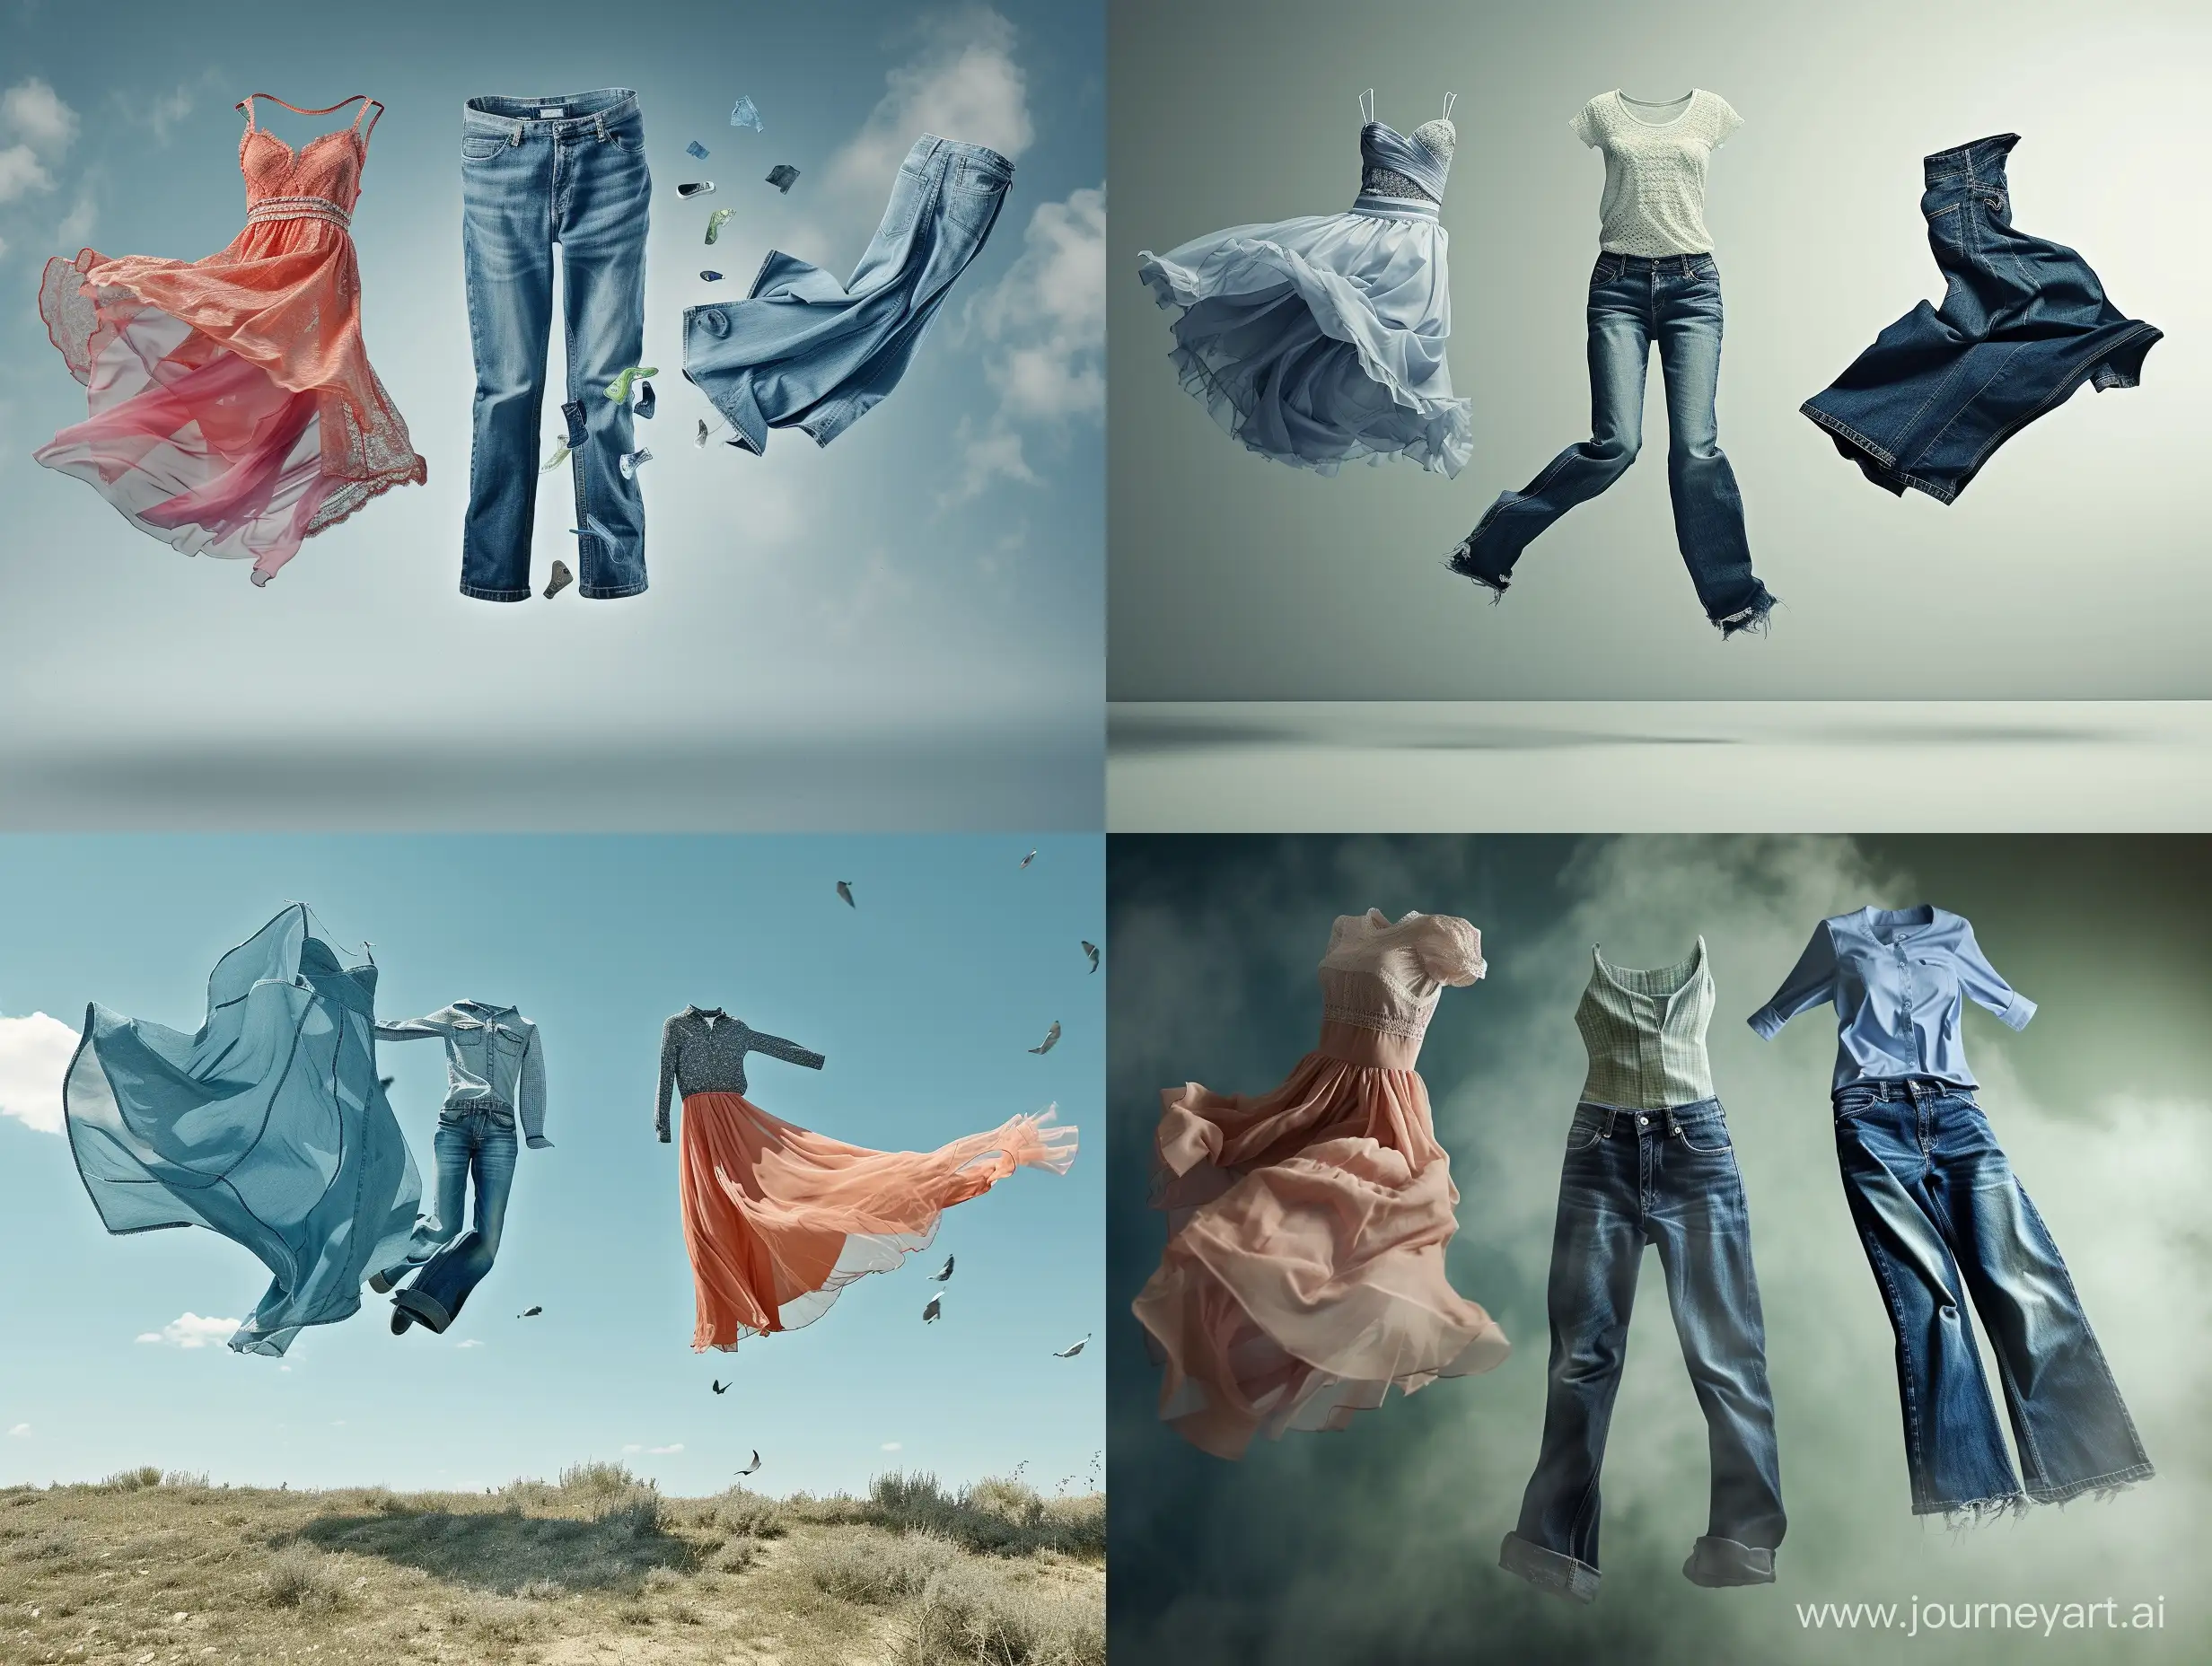 A commercial photo showing flying clothes: dresses flying, jeans flying, commercial retouching, good detailing, advertising photography